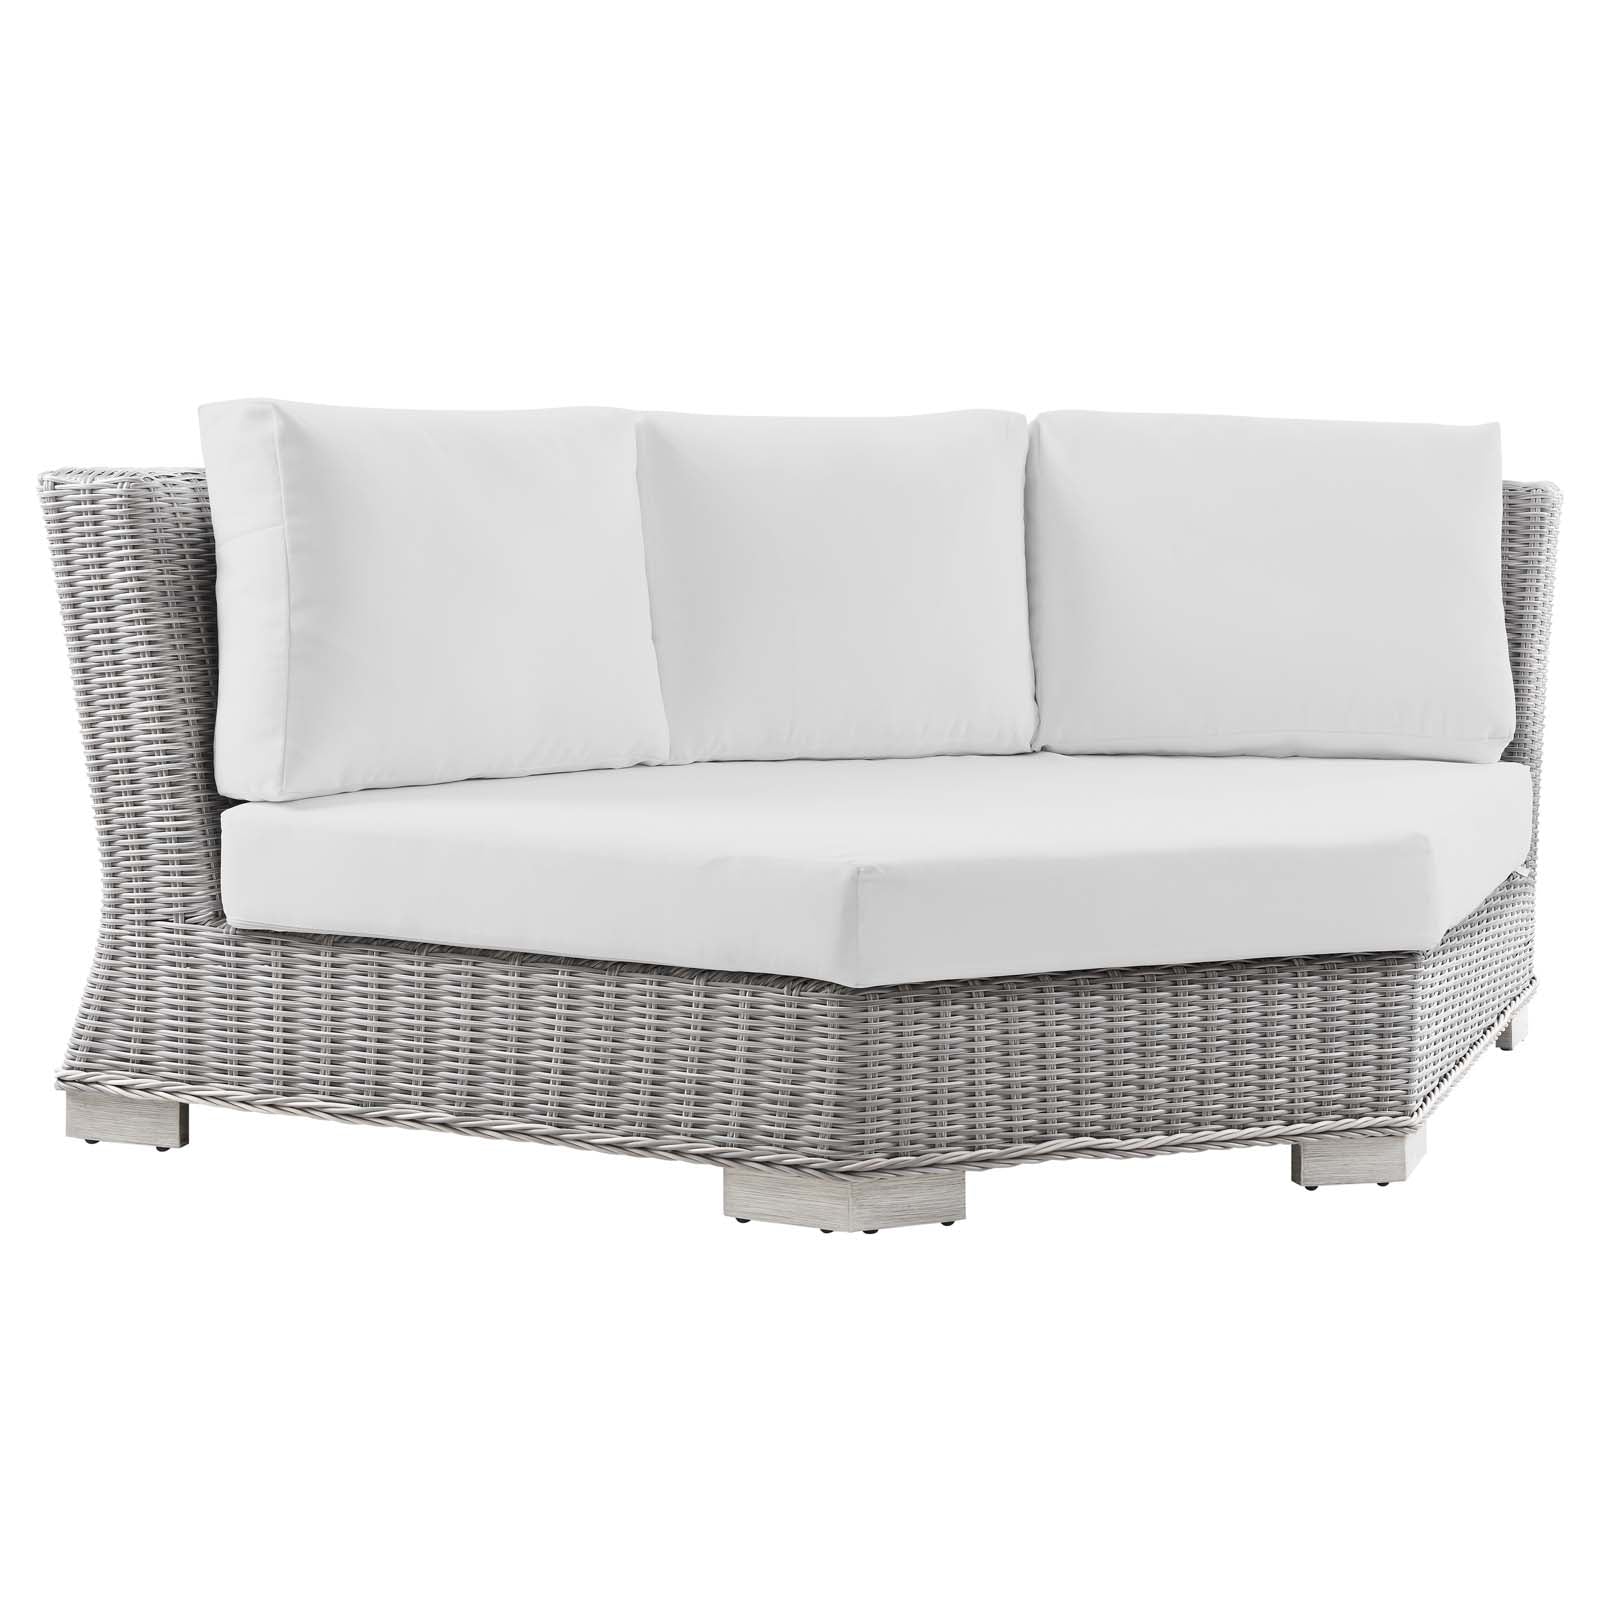 Modway Outdoor Conversation Sets - Conway Outdoor Patio Wicker Rattan 6-Piece Sectional Sofa Furniture Set Light Gray | White